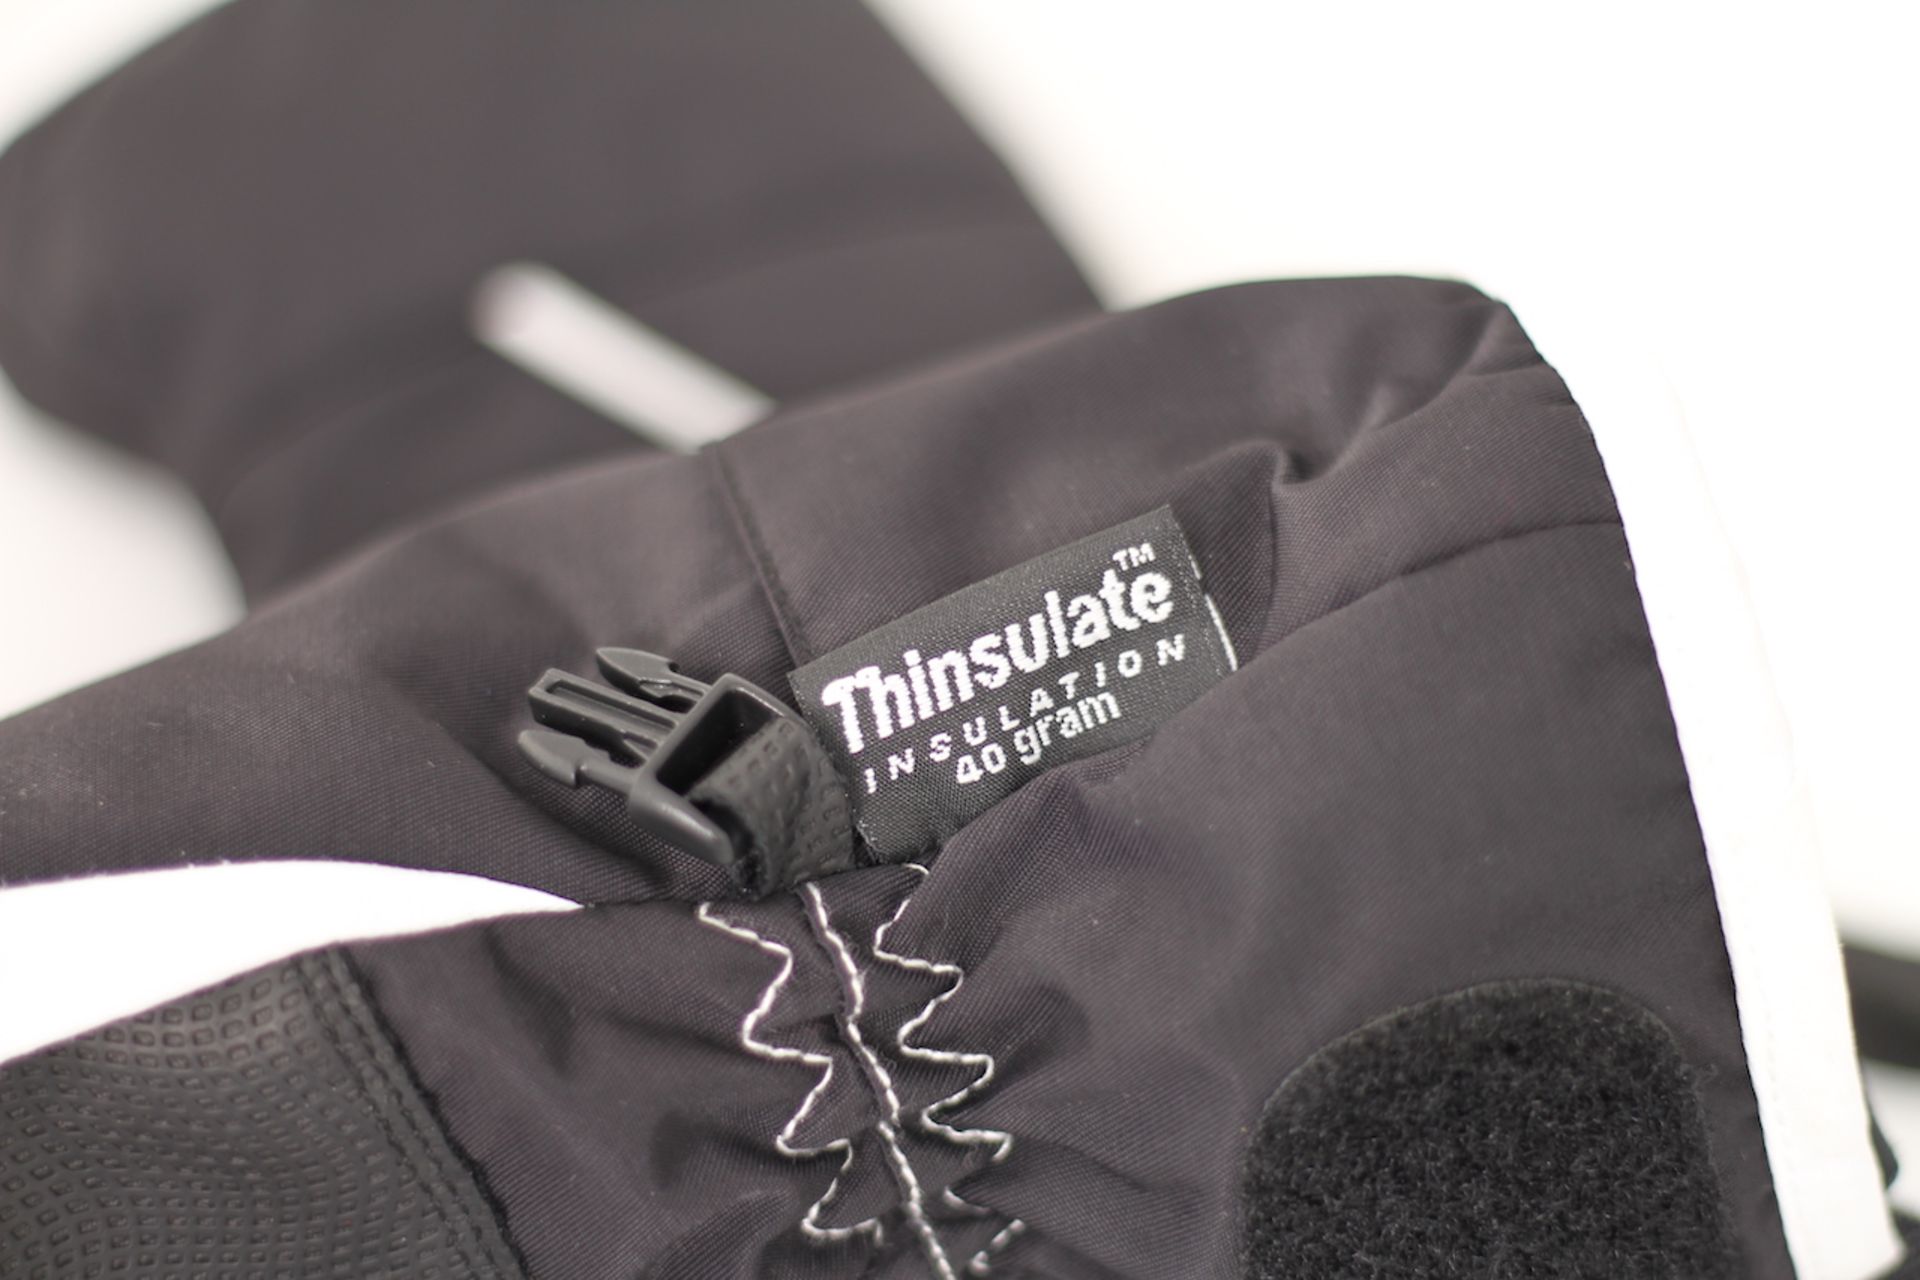 THINSULATE MITTENS, Colour : BLACK / WHITE, AGE: UNKNOWN, SIZE: MEDIUM, CONDITION GRADE: 1 VERY GOOD - Image 2 of 3